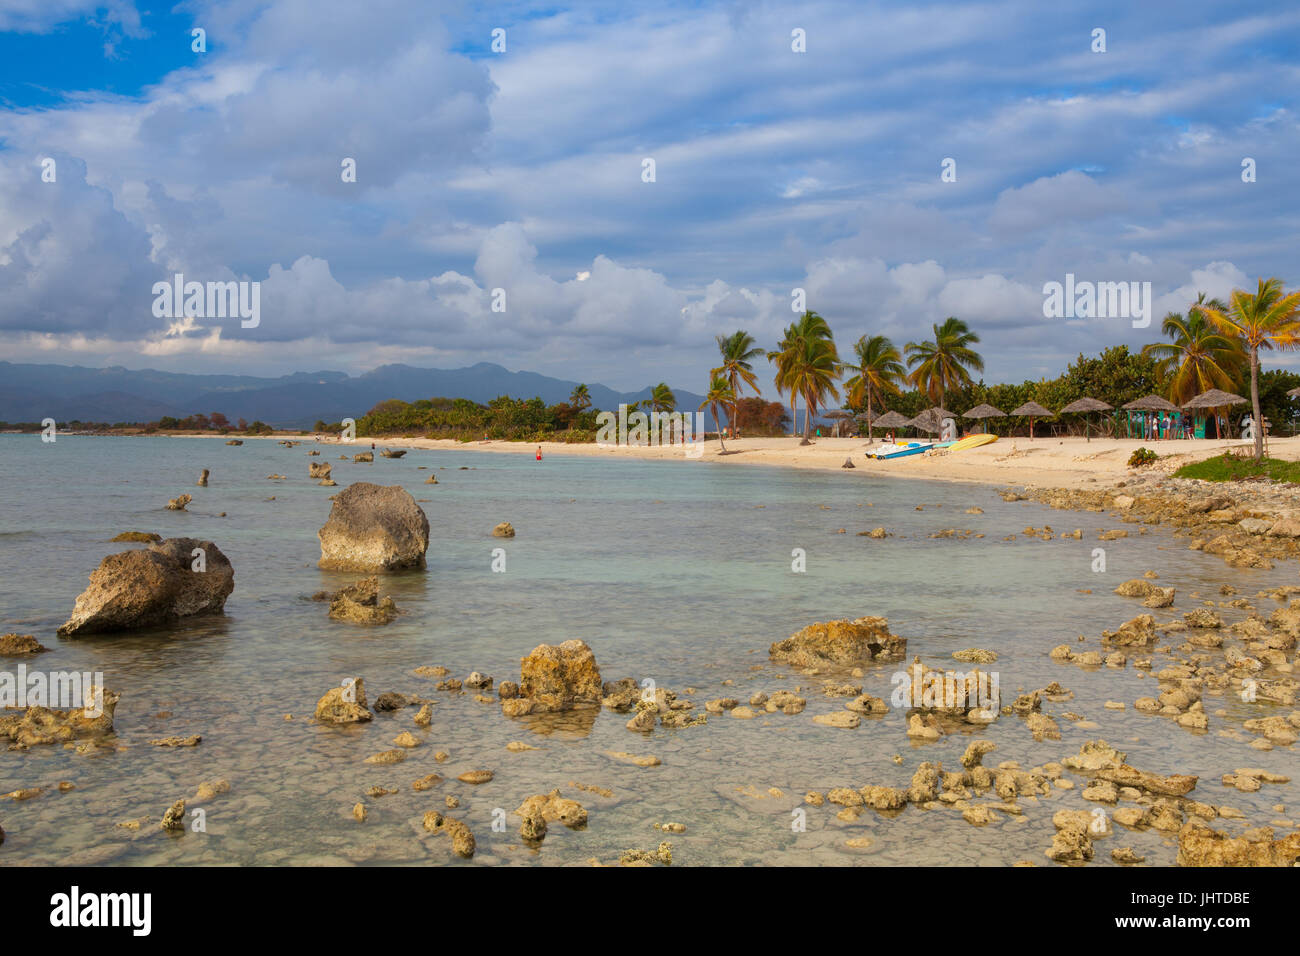 Play Giron,Cuba - January 30,2017:  On the beach Playa Giron, Cuba. This beach is famous for its role during the Bay of Pigs invasion. Stock Photo